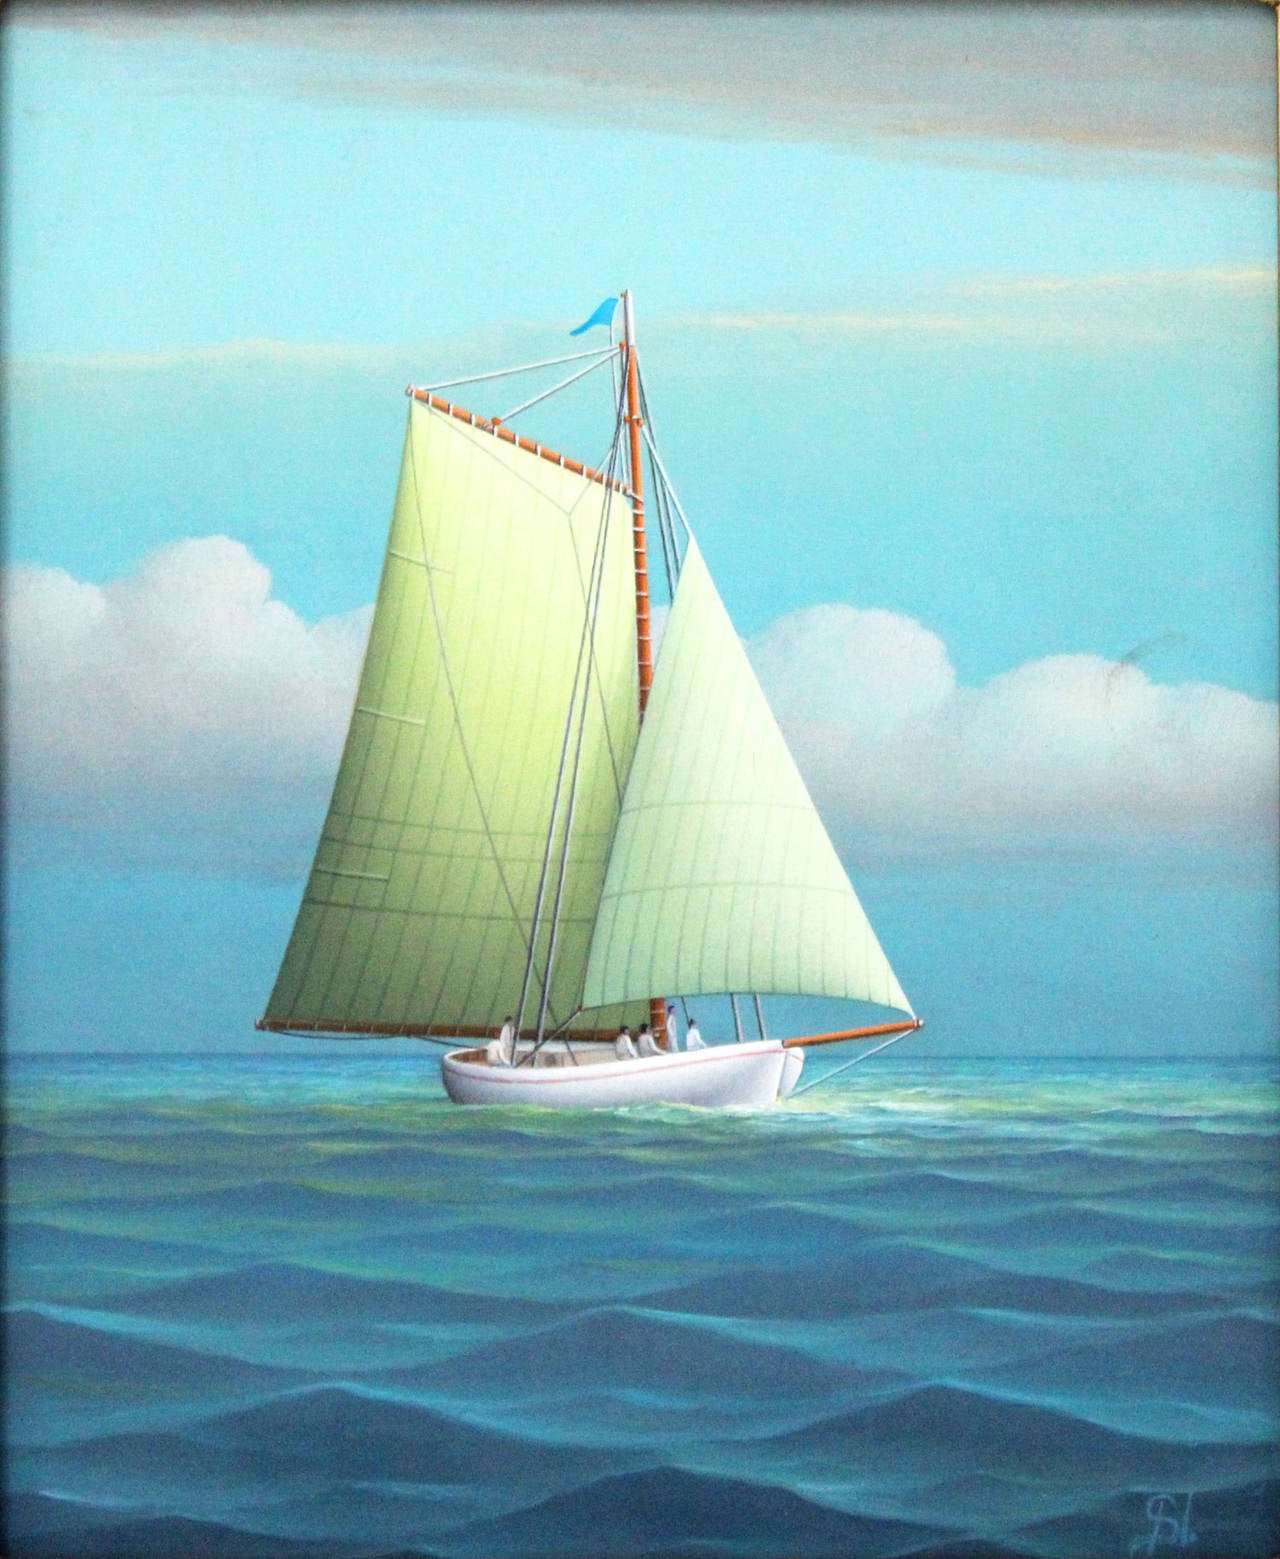 Majestic Sea - Painting by George Nemethy